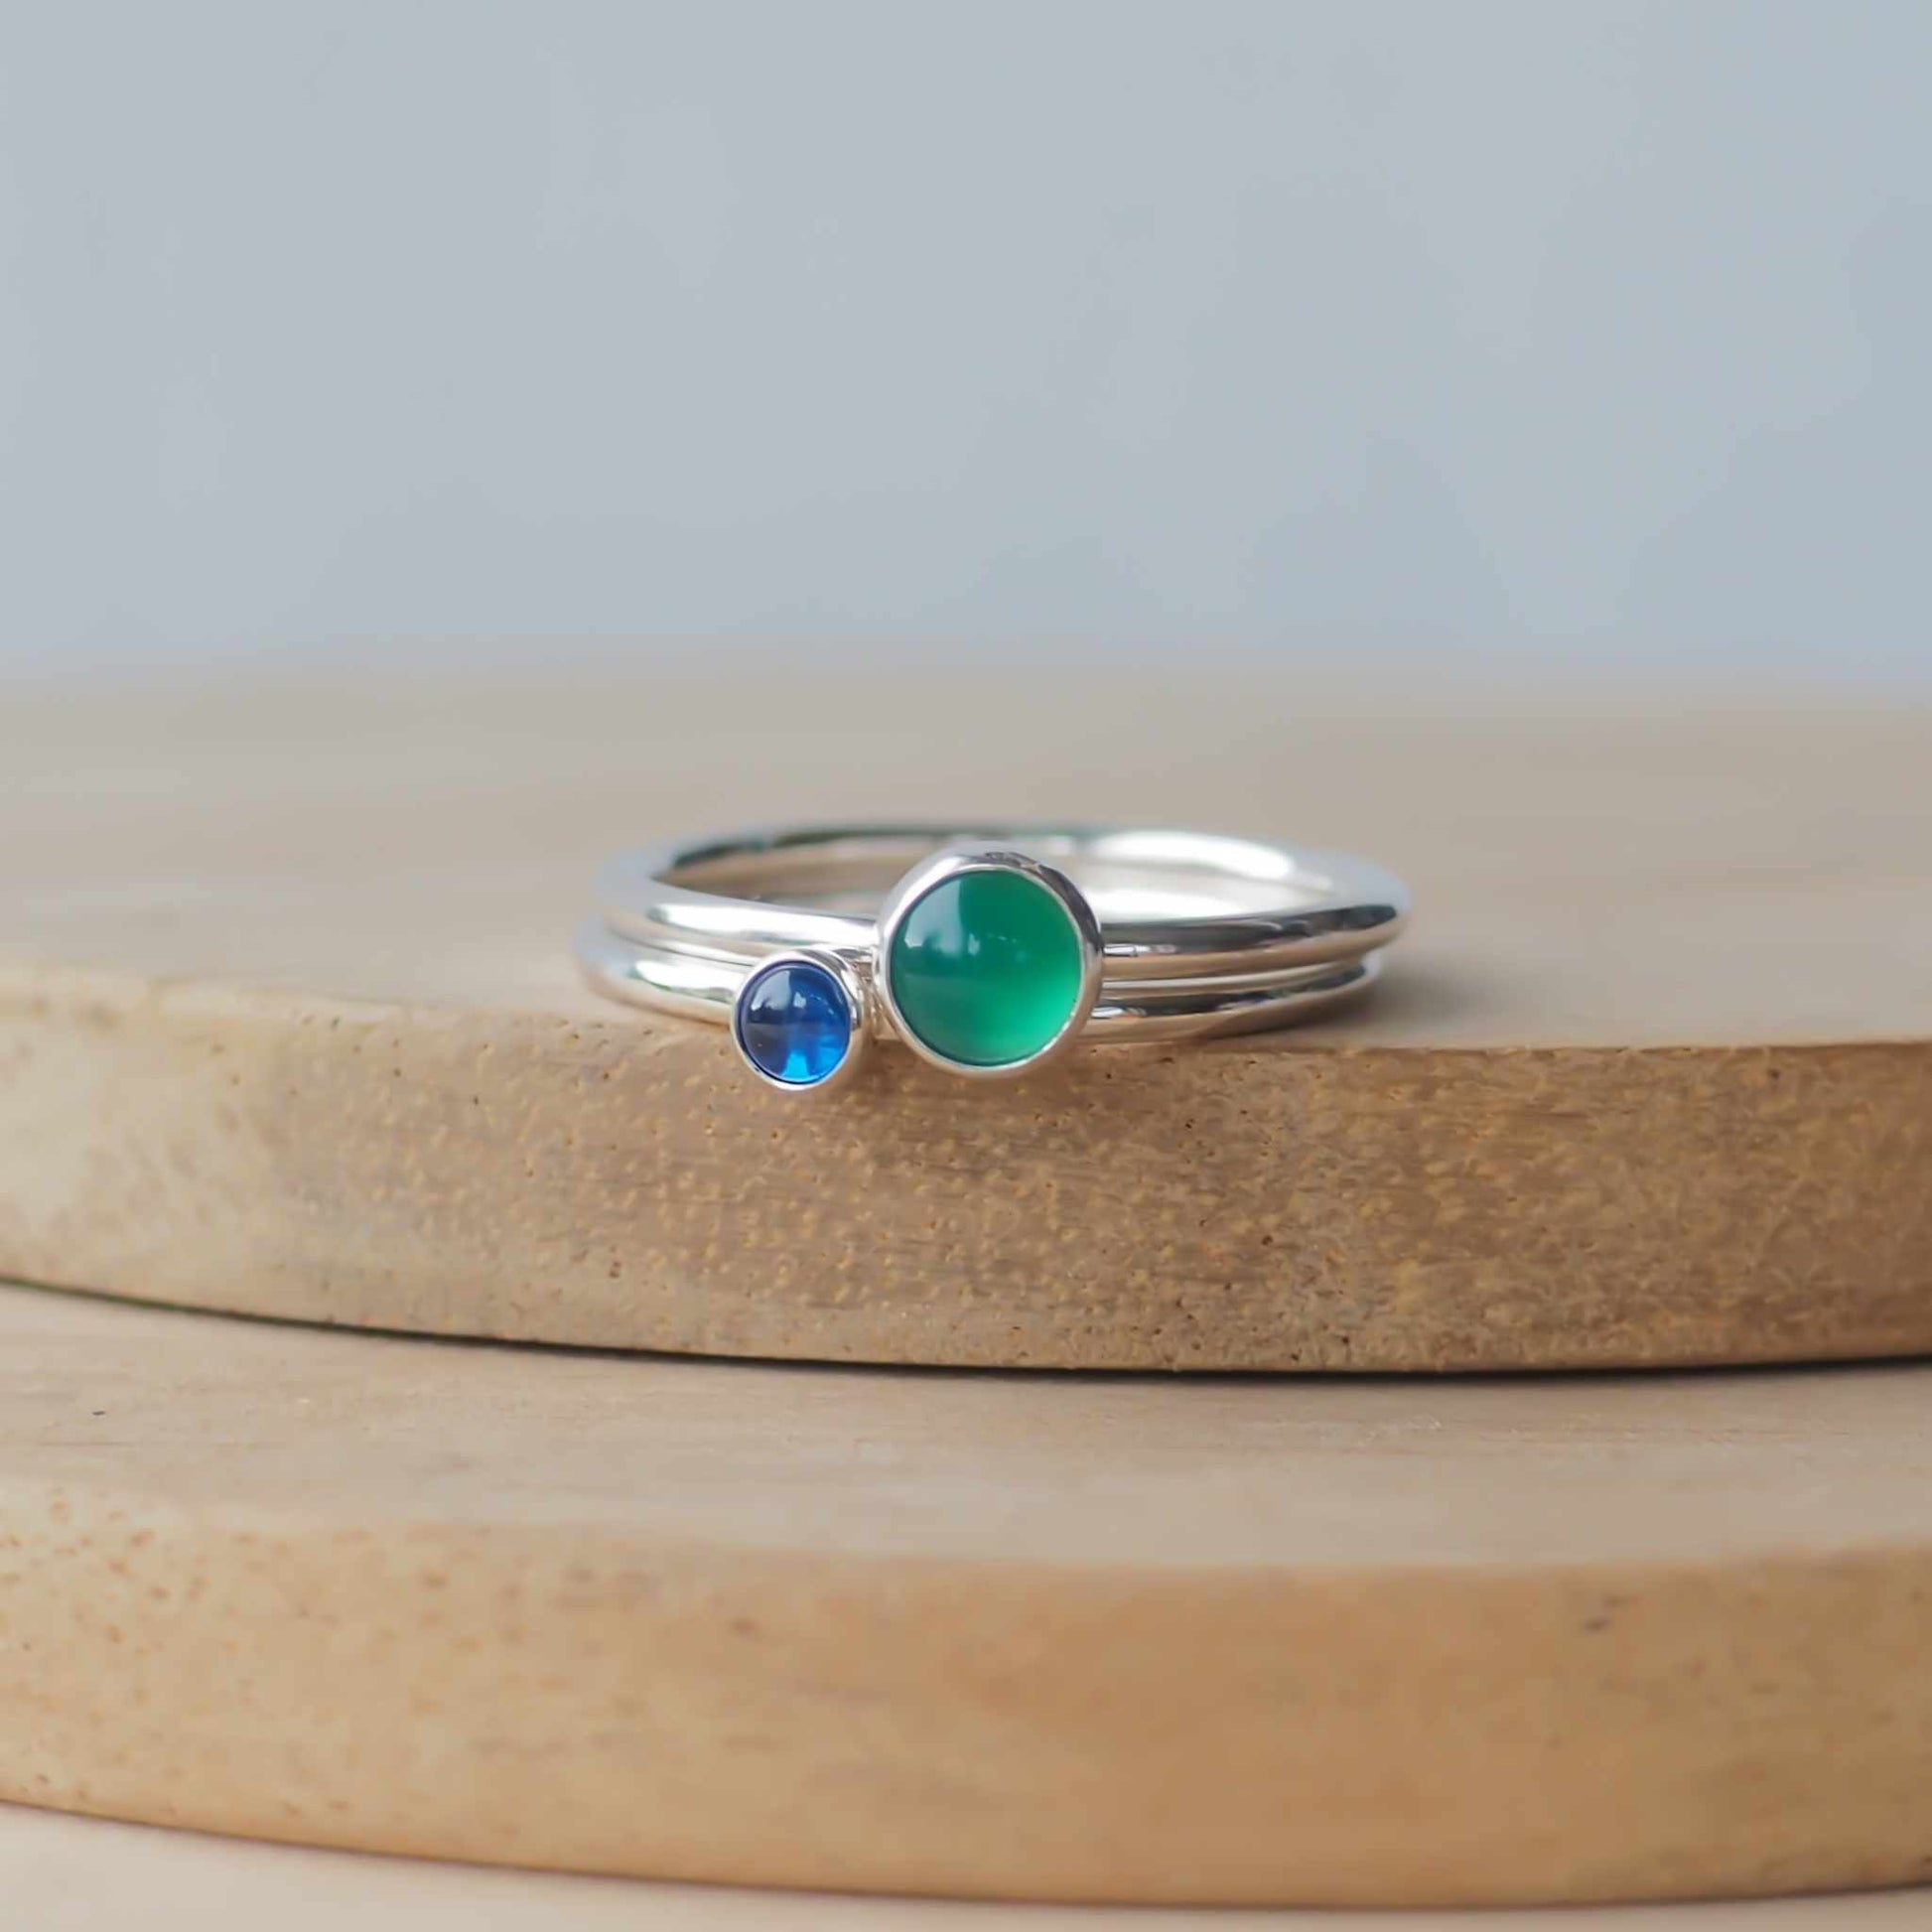 Two silver ring set with round stones. Simple round bands with a 5mm Green Agate and a 3mm Lab Sapphire. Rings are pictured on wood background. Handmade in Scotland by Maram Jewellery